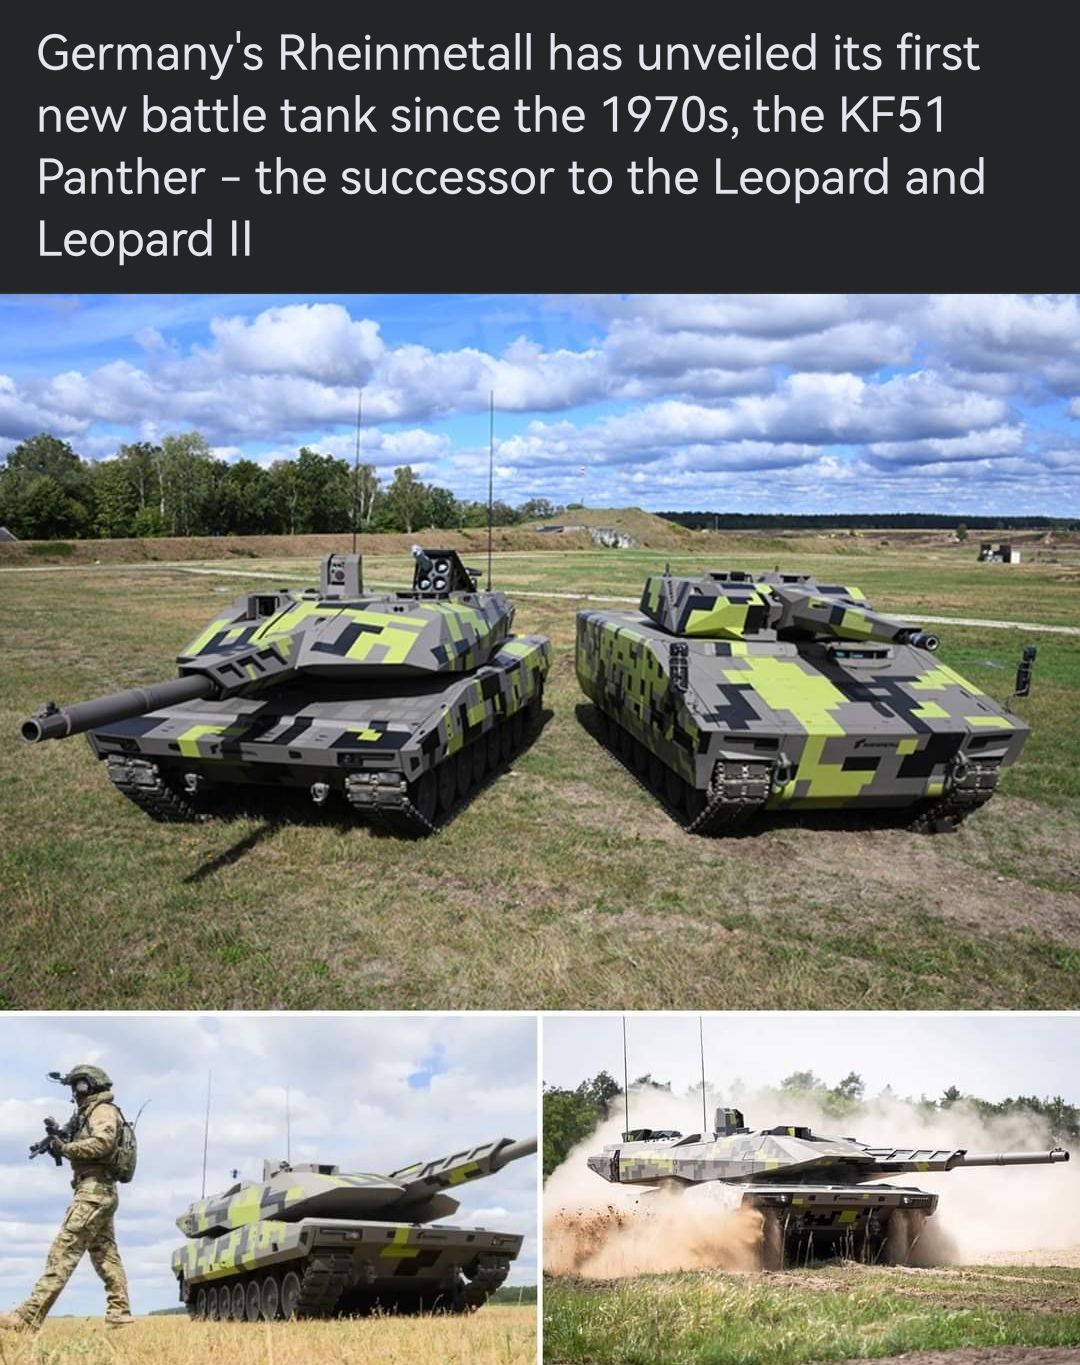 Nature's healing, there are panther tanks in Germany again